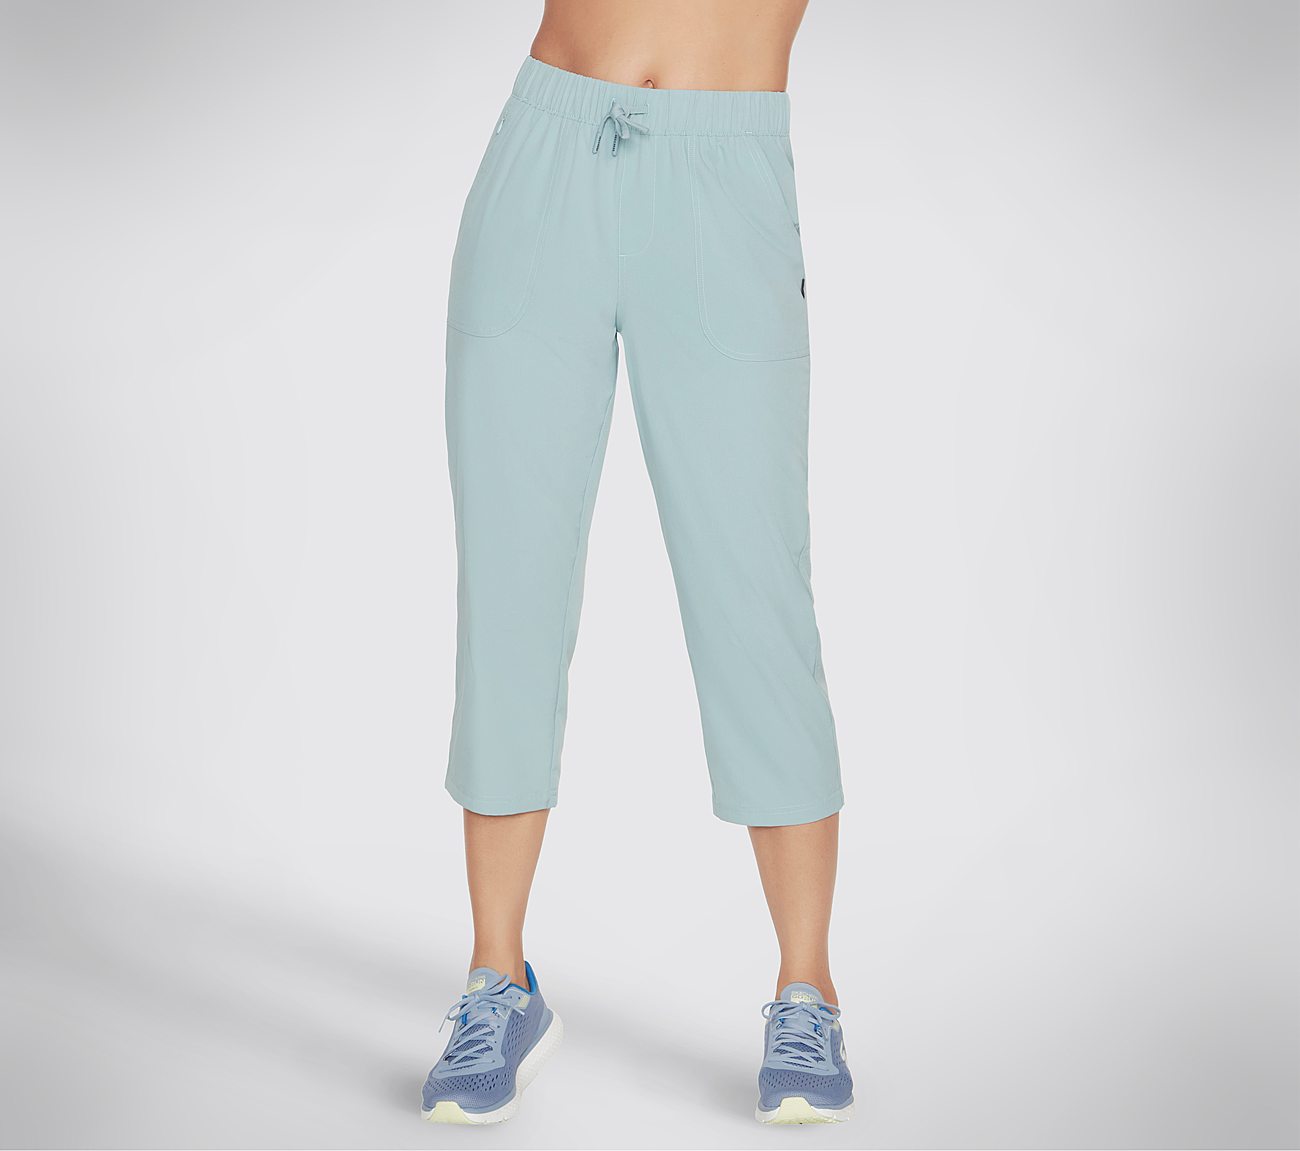 Buy U.S. CROWN Grey Net Stretchable Yoga Pant for Women at